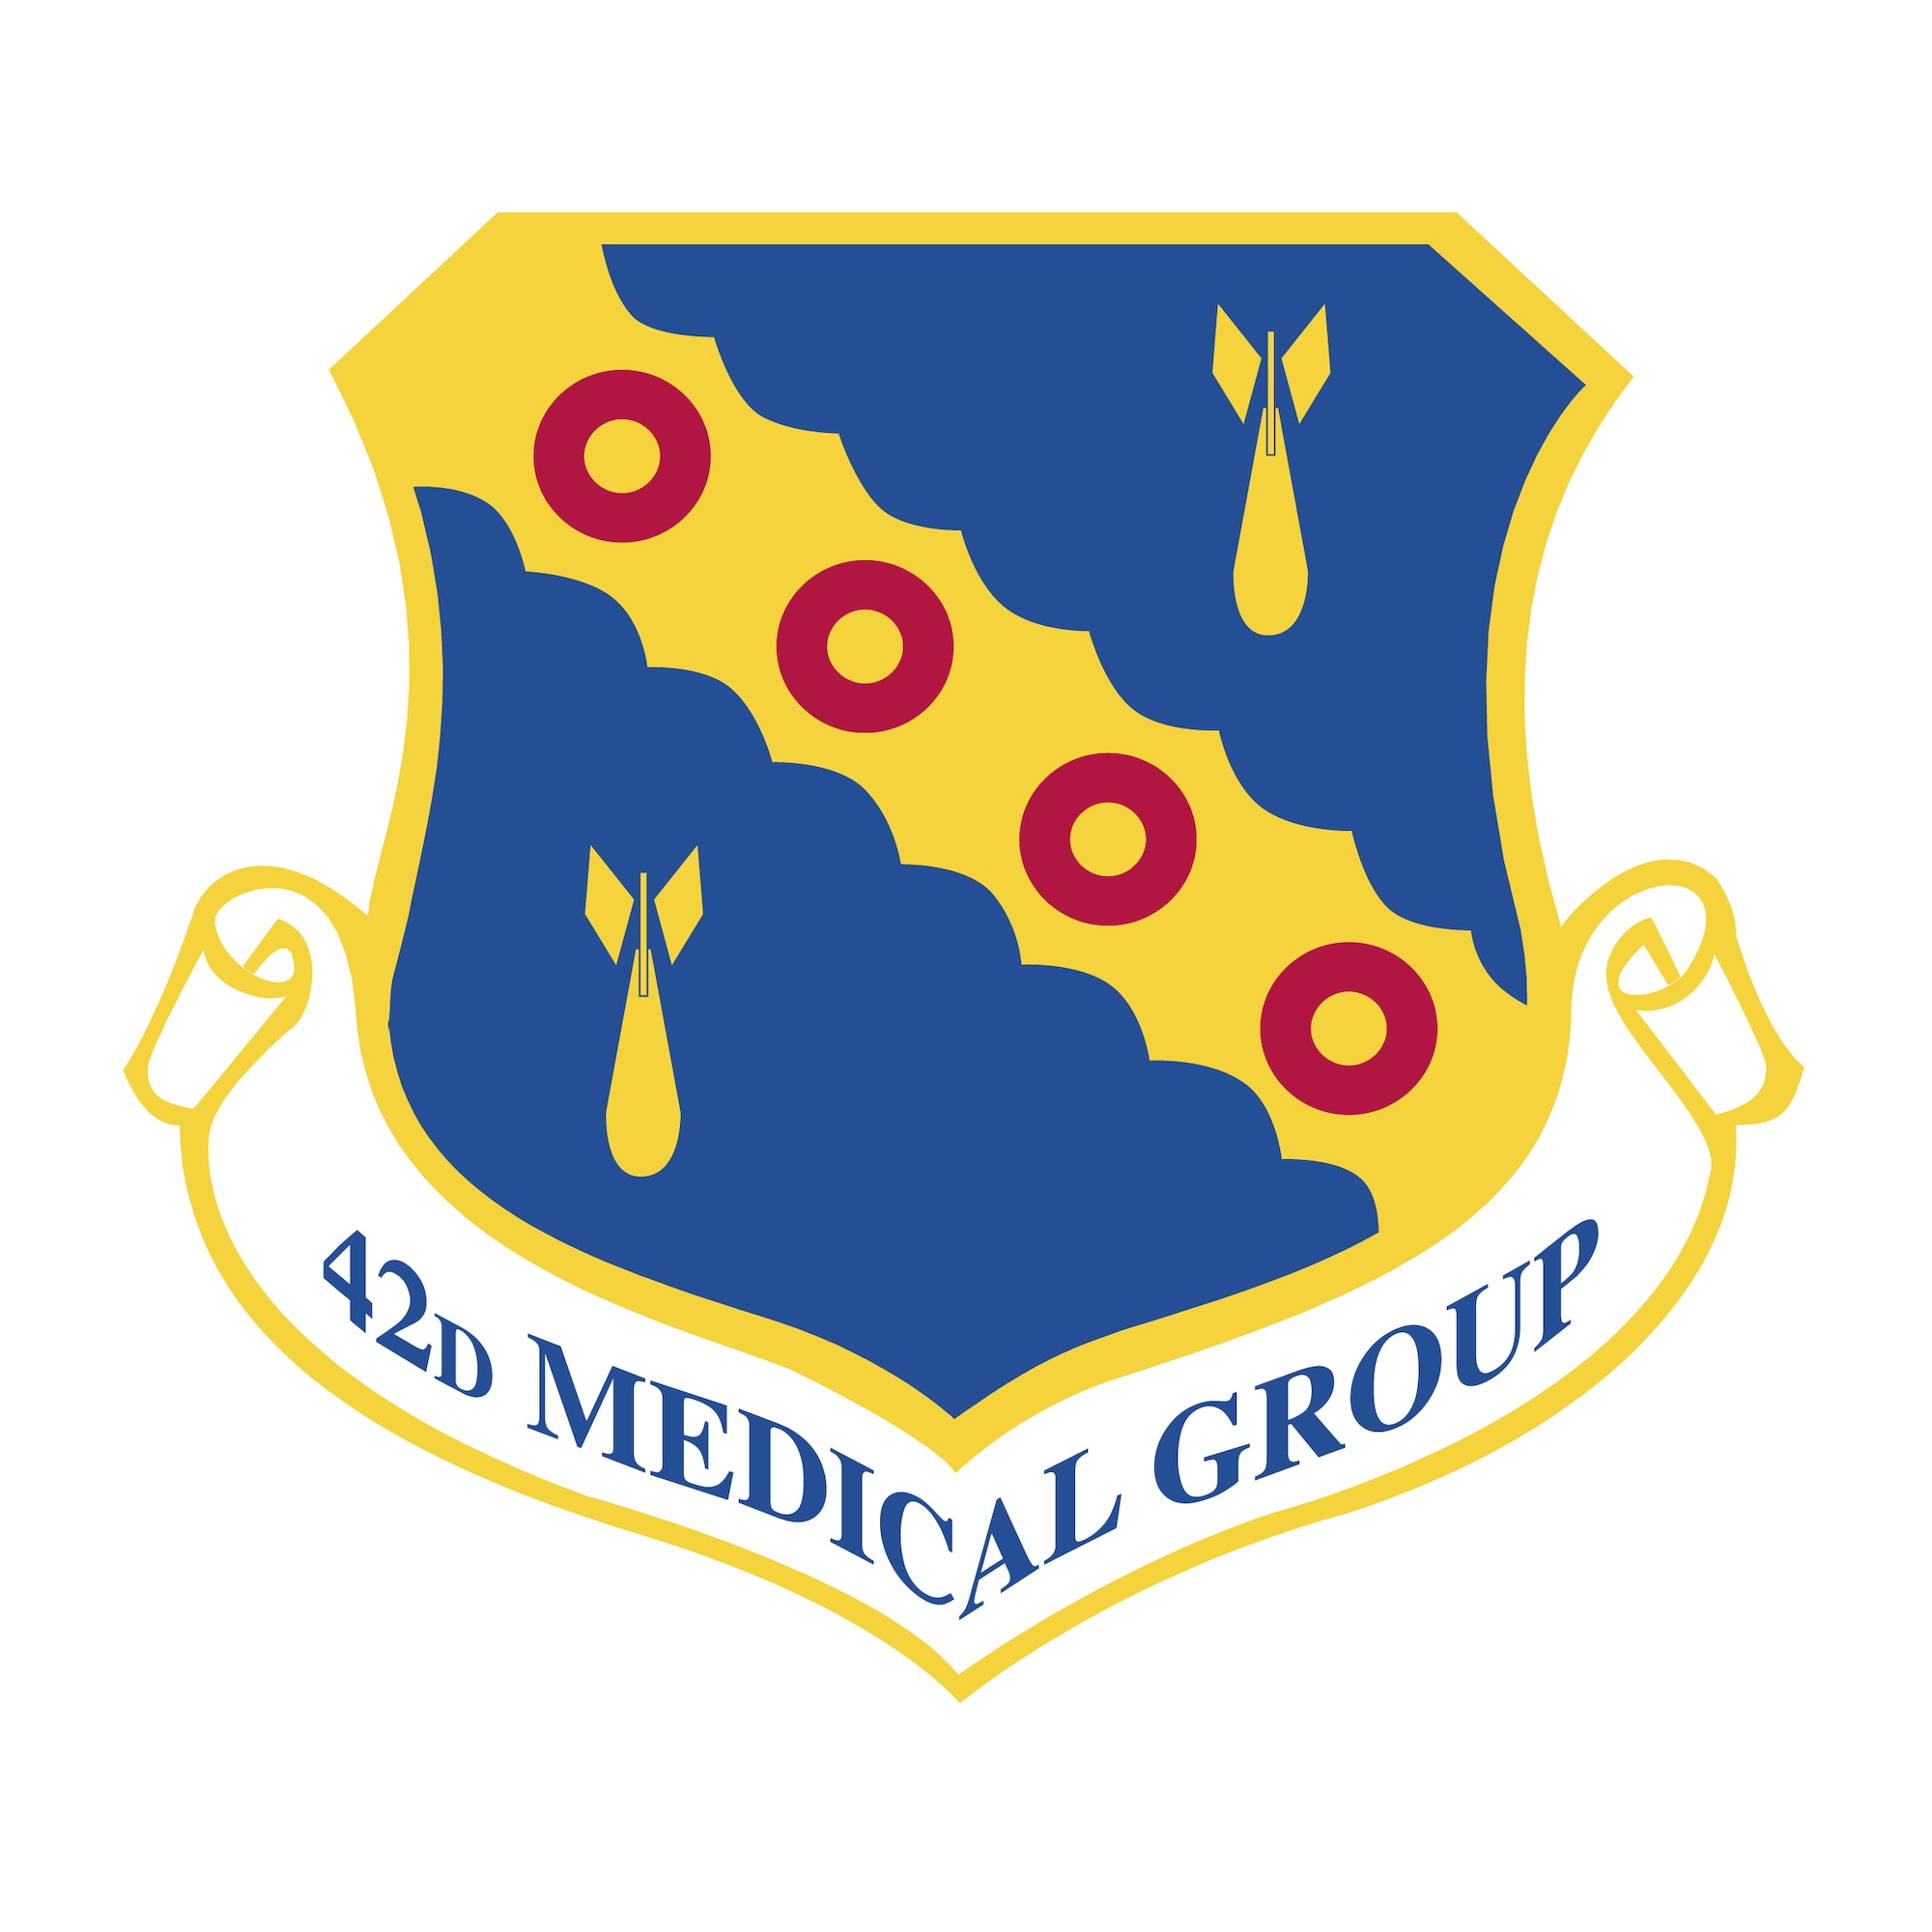 42nd Medical Group Shield ( Courtesy Graphic)